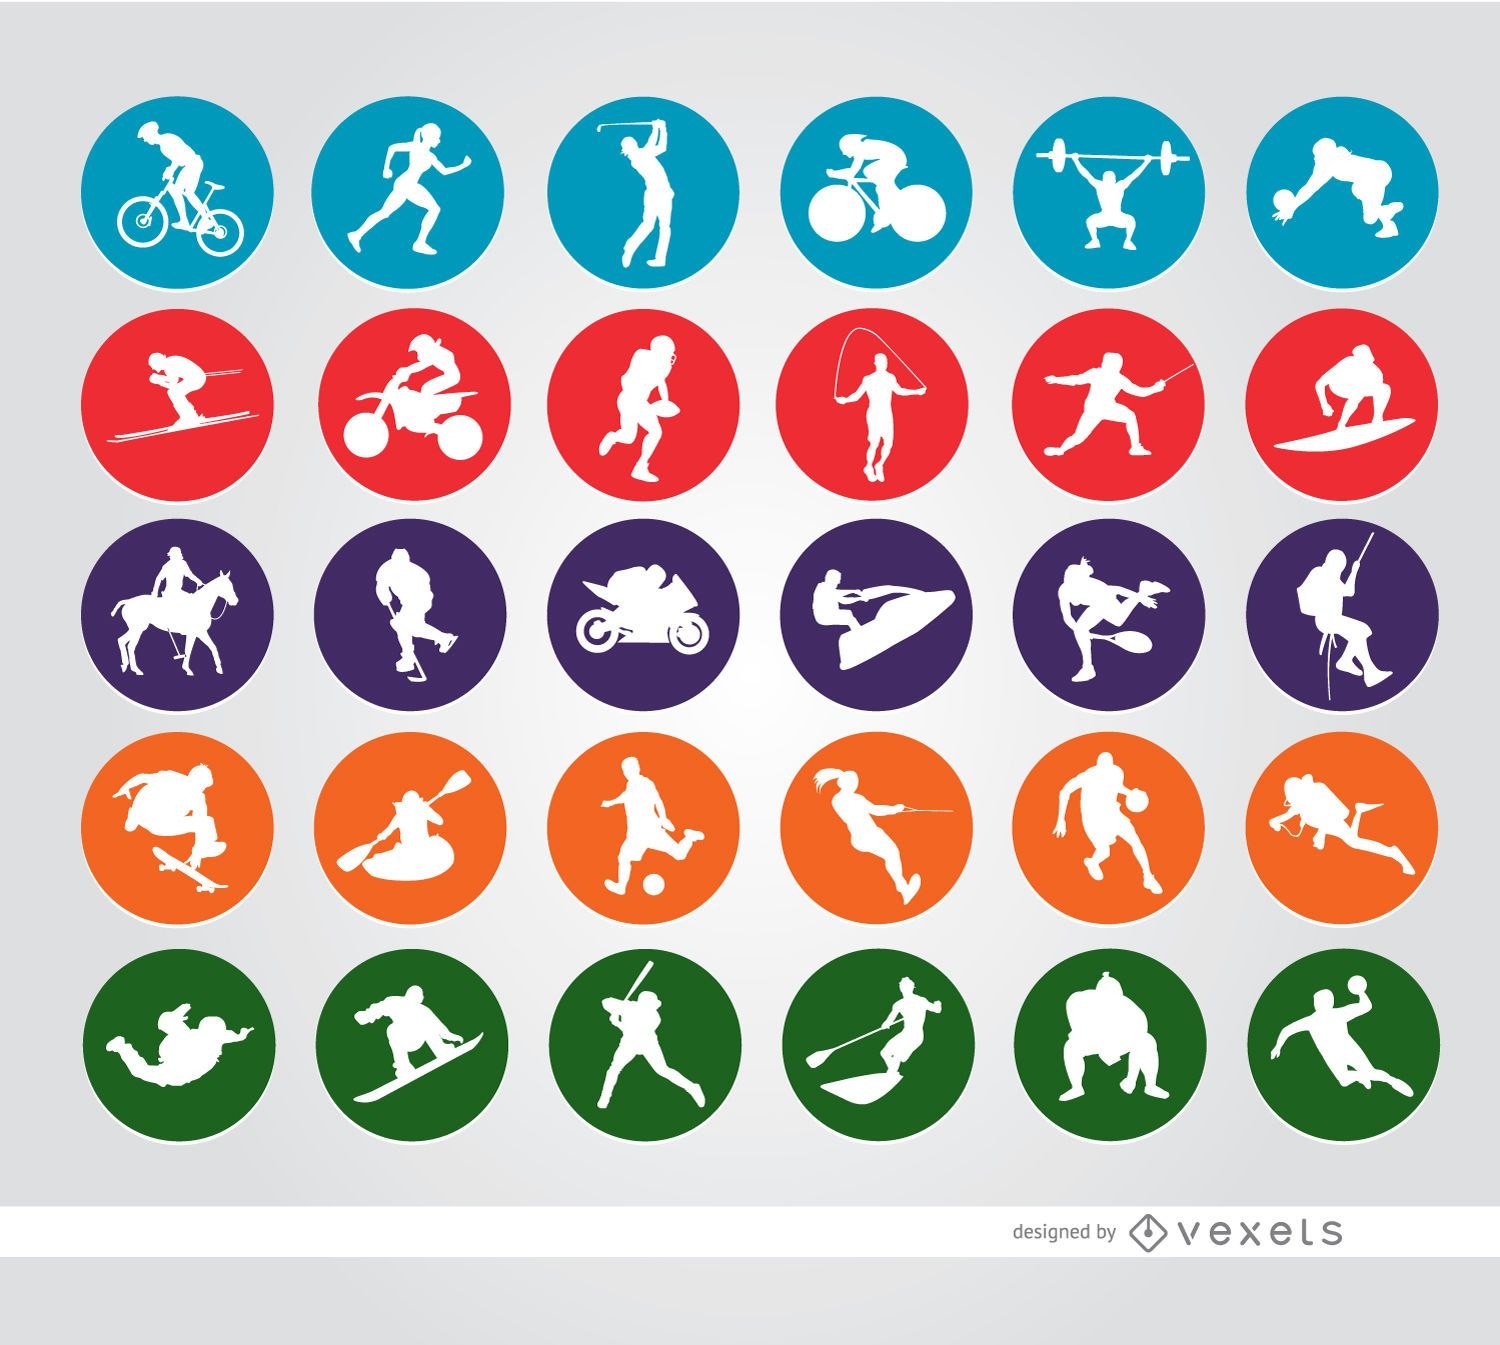 weightlifter Icon. Silhouette of an athlete icon. Sportsman